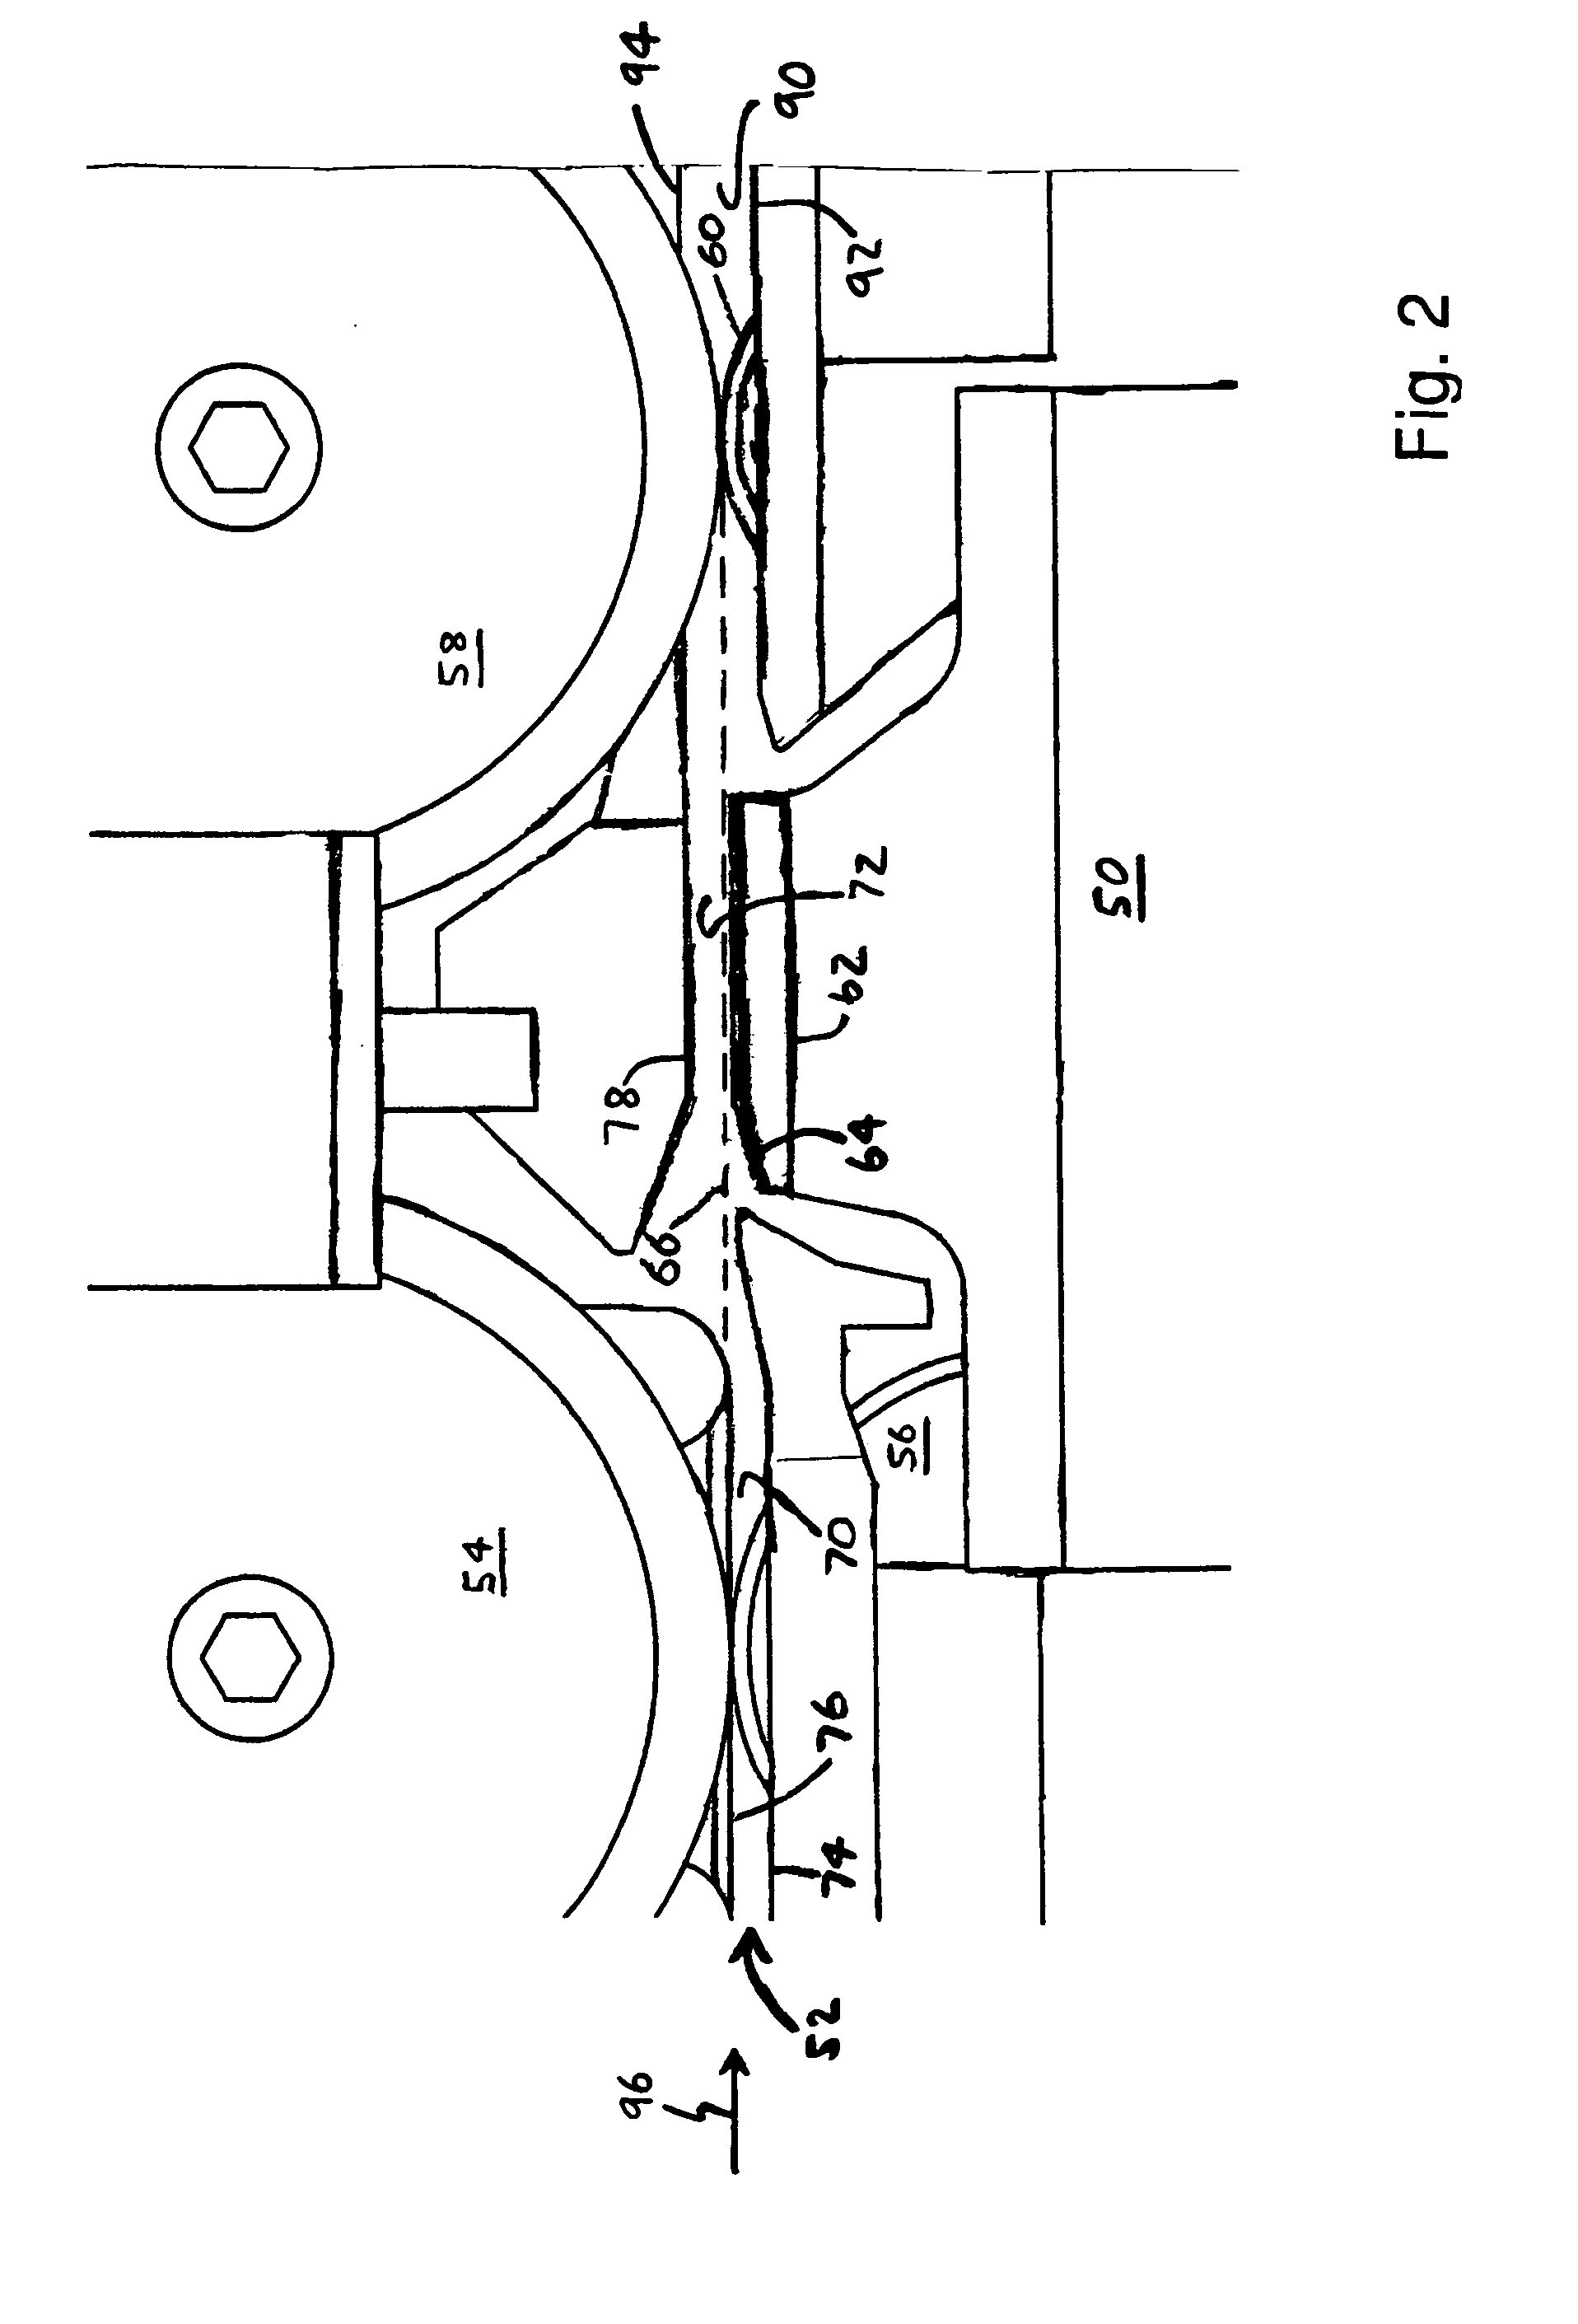 Document processing system and document transport / camera interface